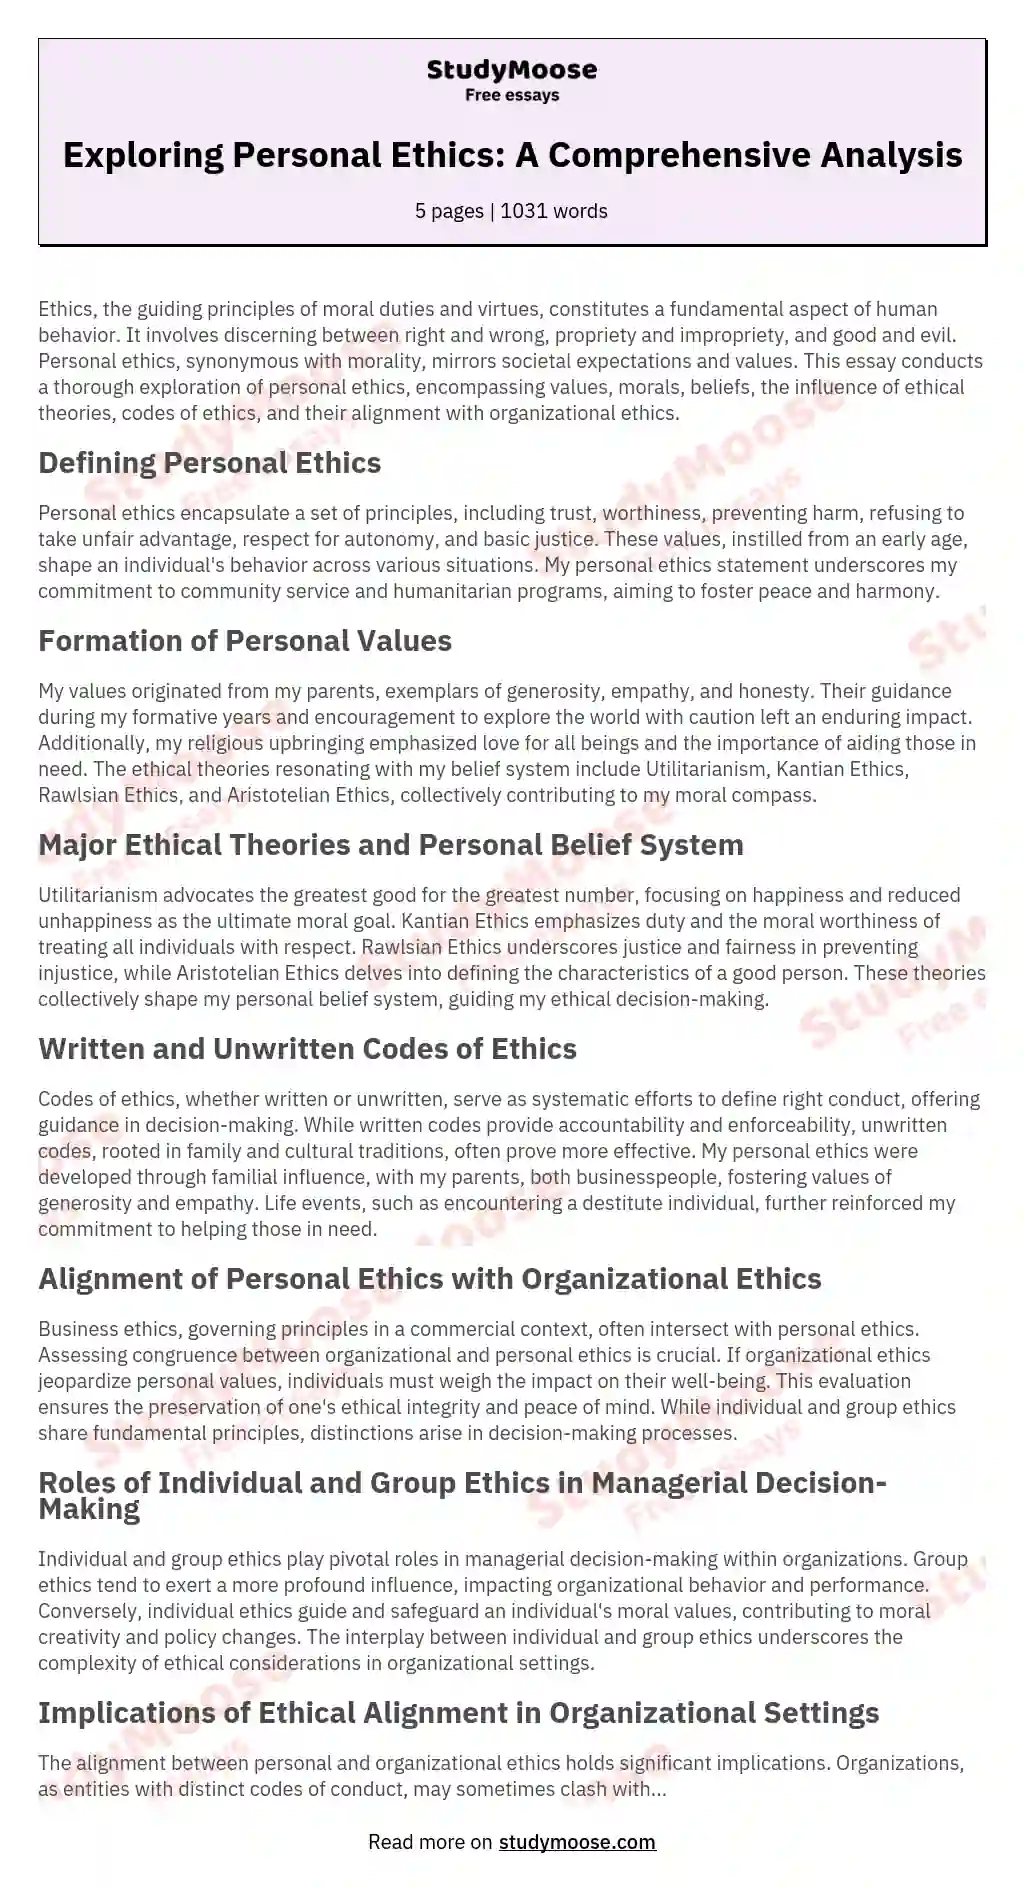 Exploring Personal Ethics: A Comprehensive Analysis essay